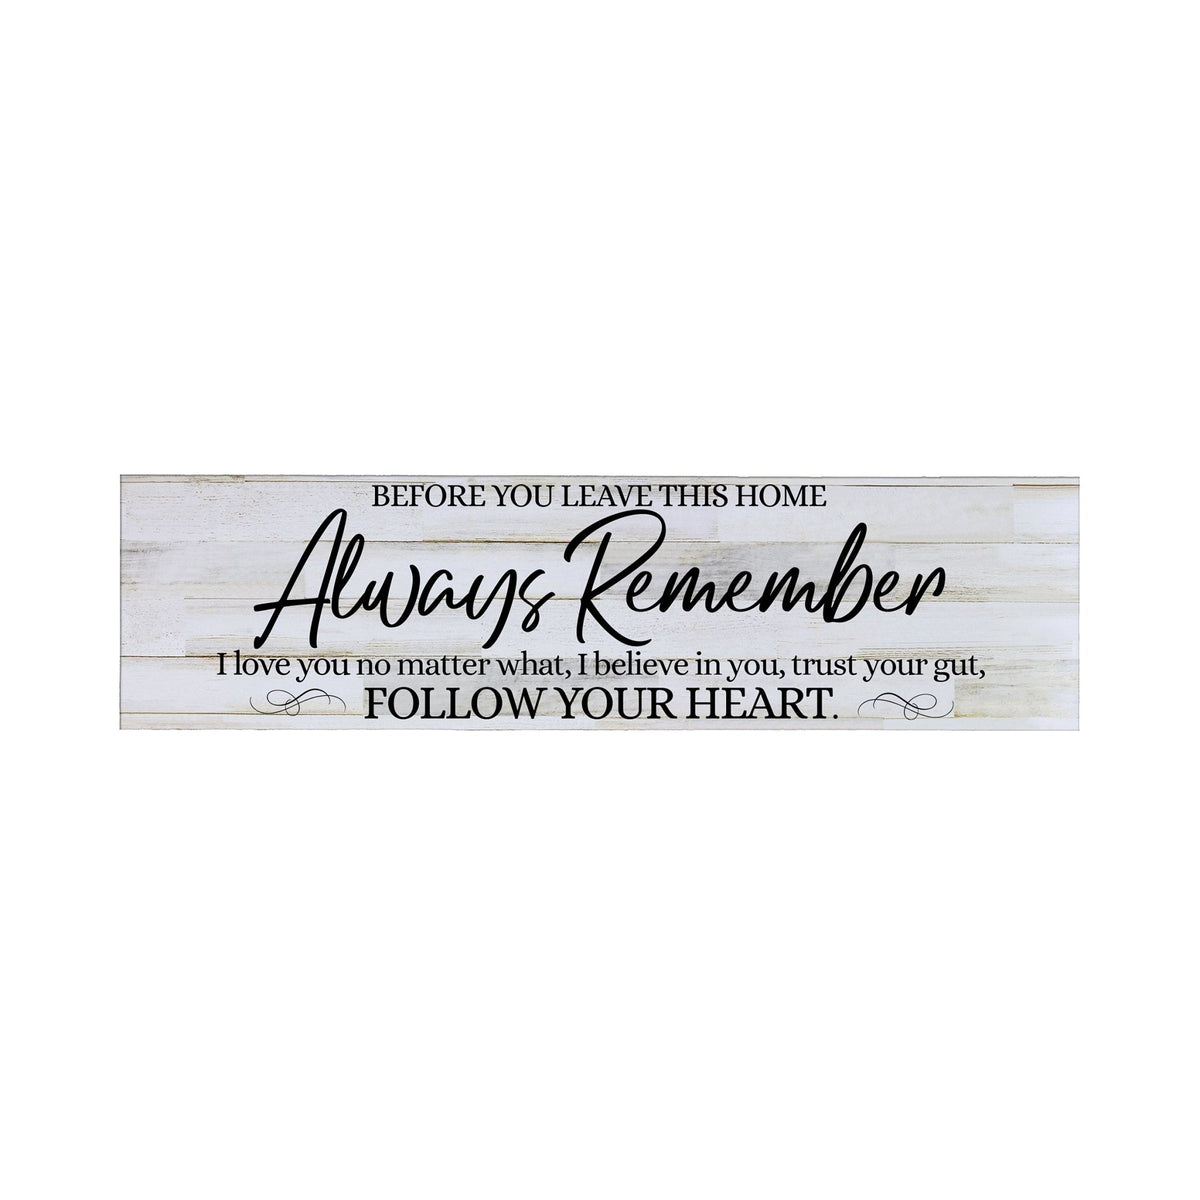 Inspirational Modern Wooden Wall Hanging Plaque 10x40 - Before You Leave This Home - LifeSong Milestones